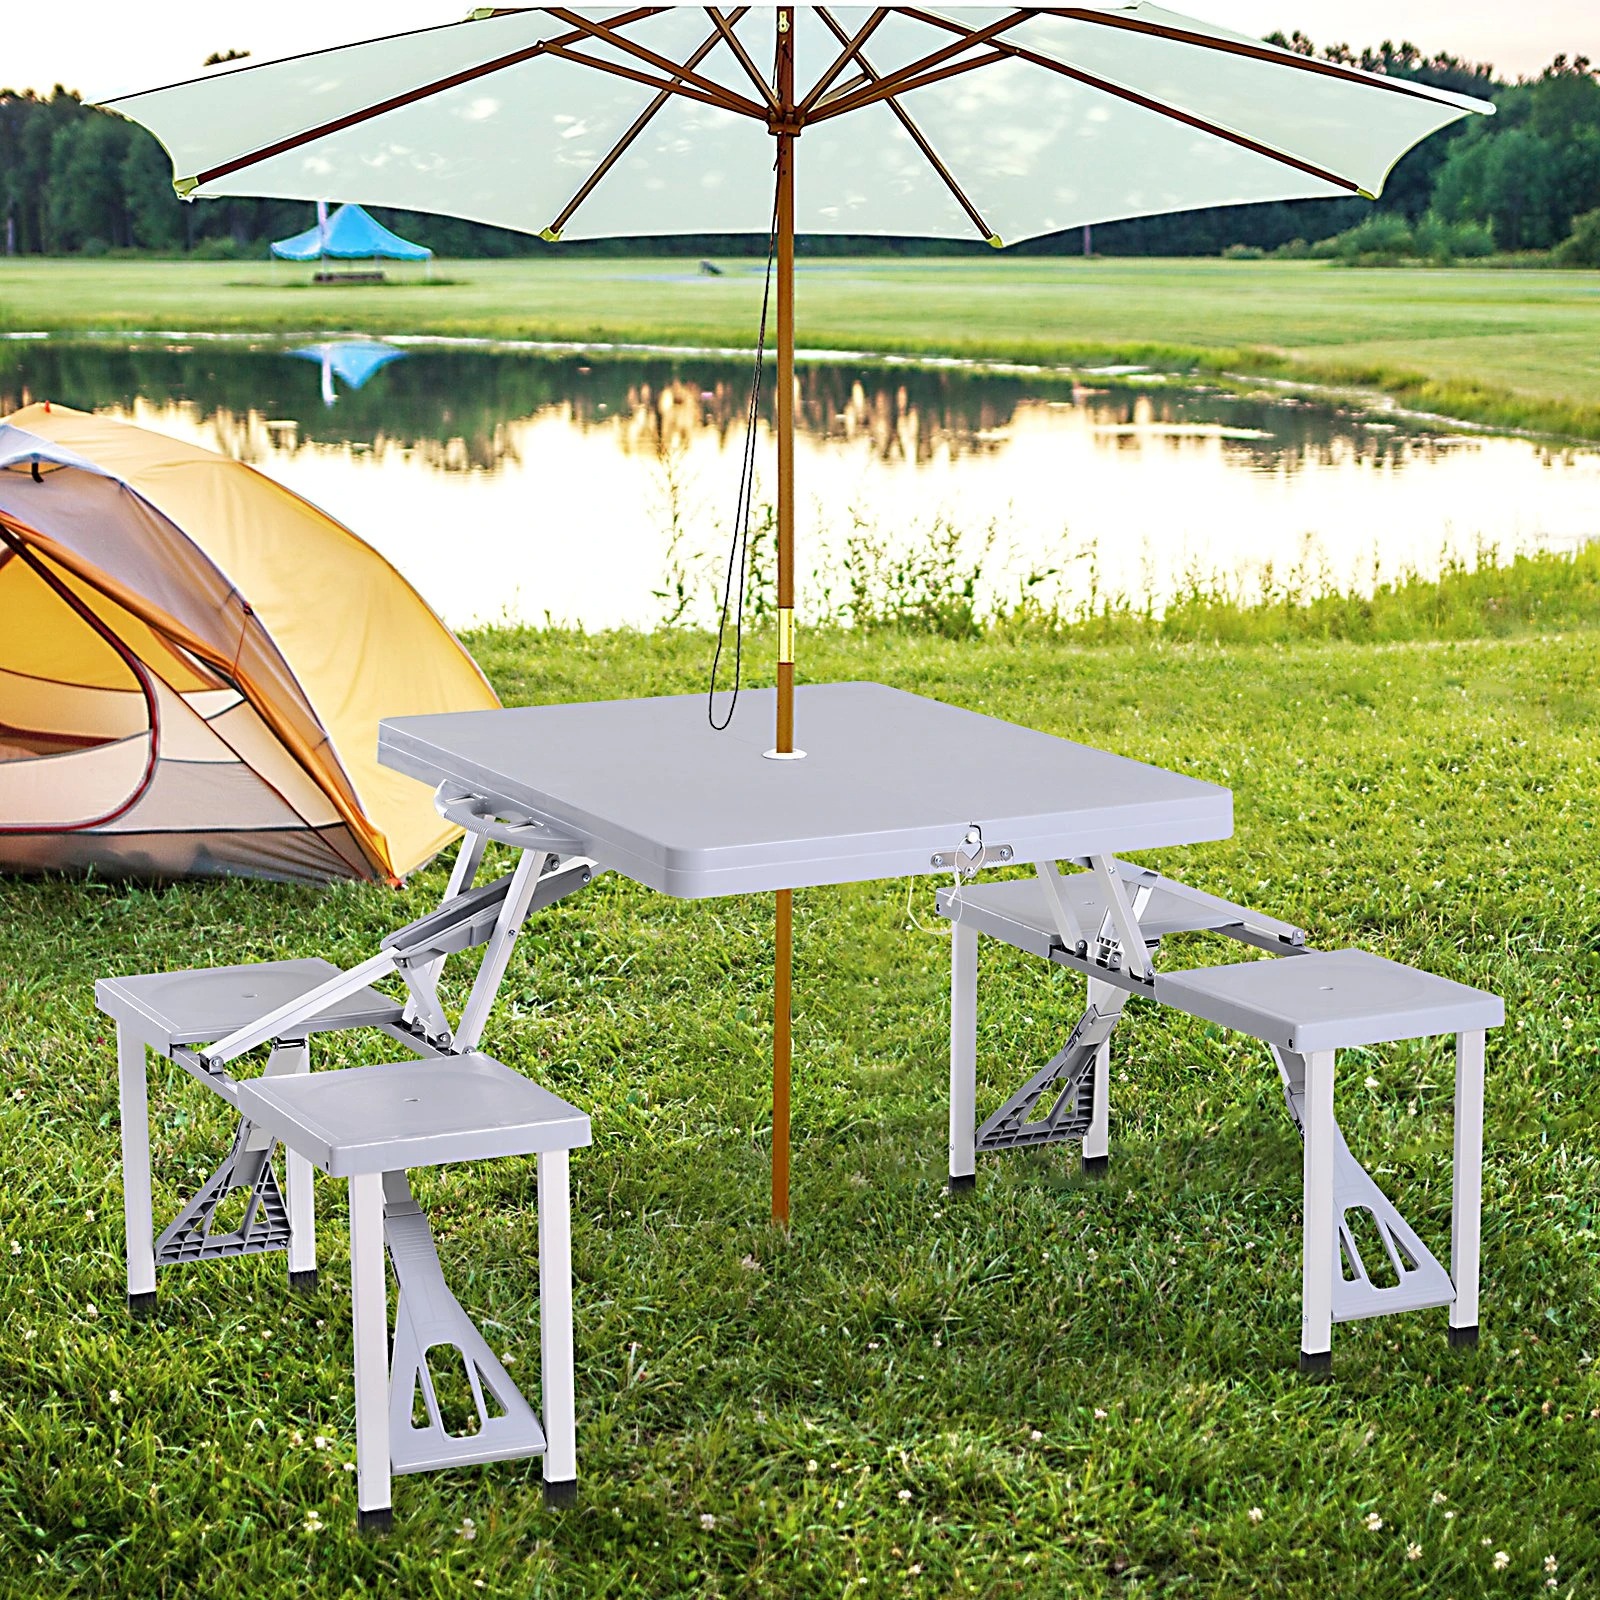  Portable Foldable Camping Picnic Table with Seats Chairs and Umbrella Hole, 4-Person Fold Up Travel Picnic Table, Grey